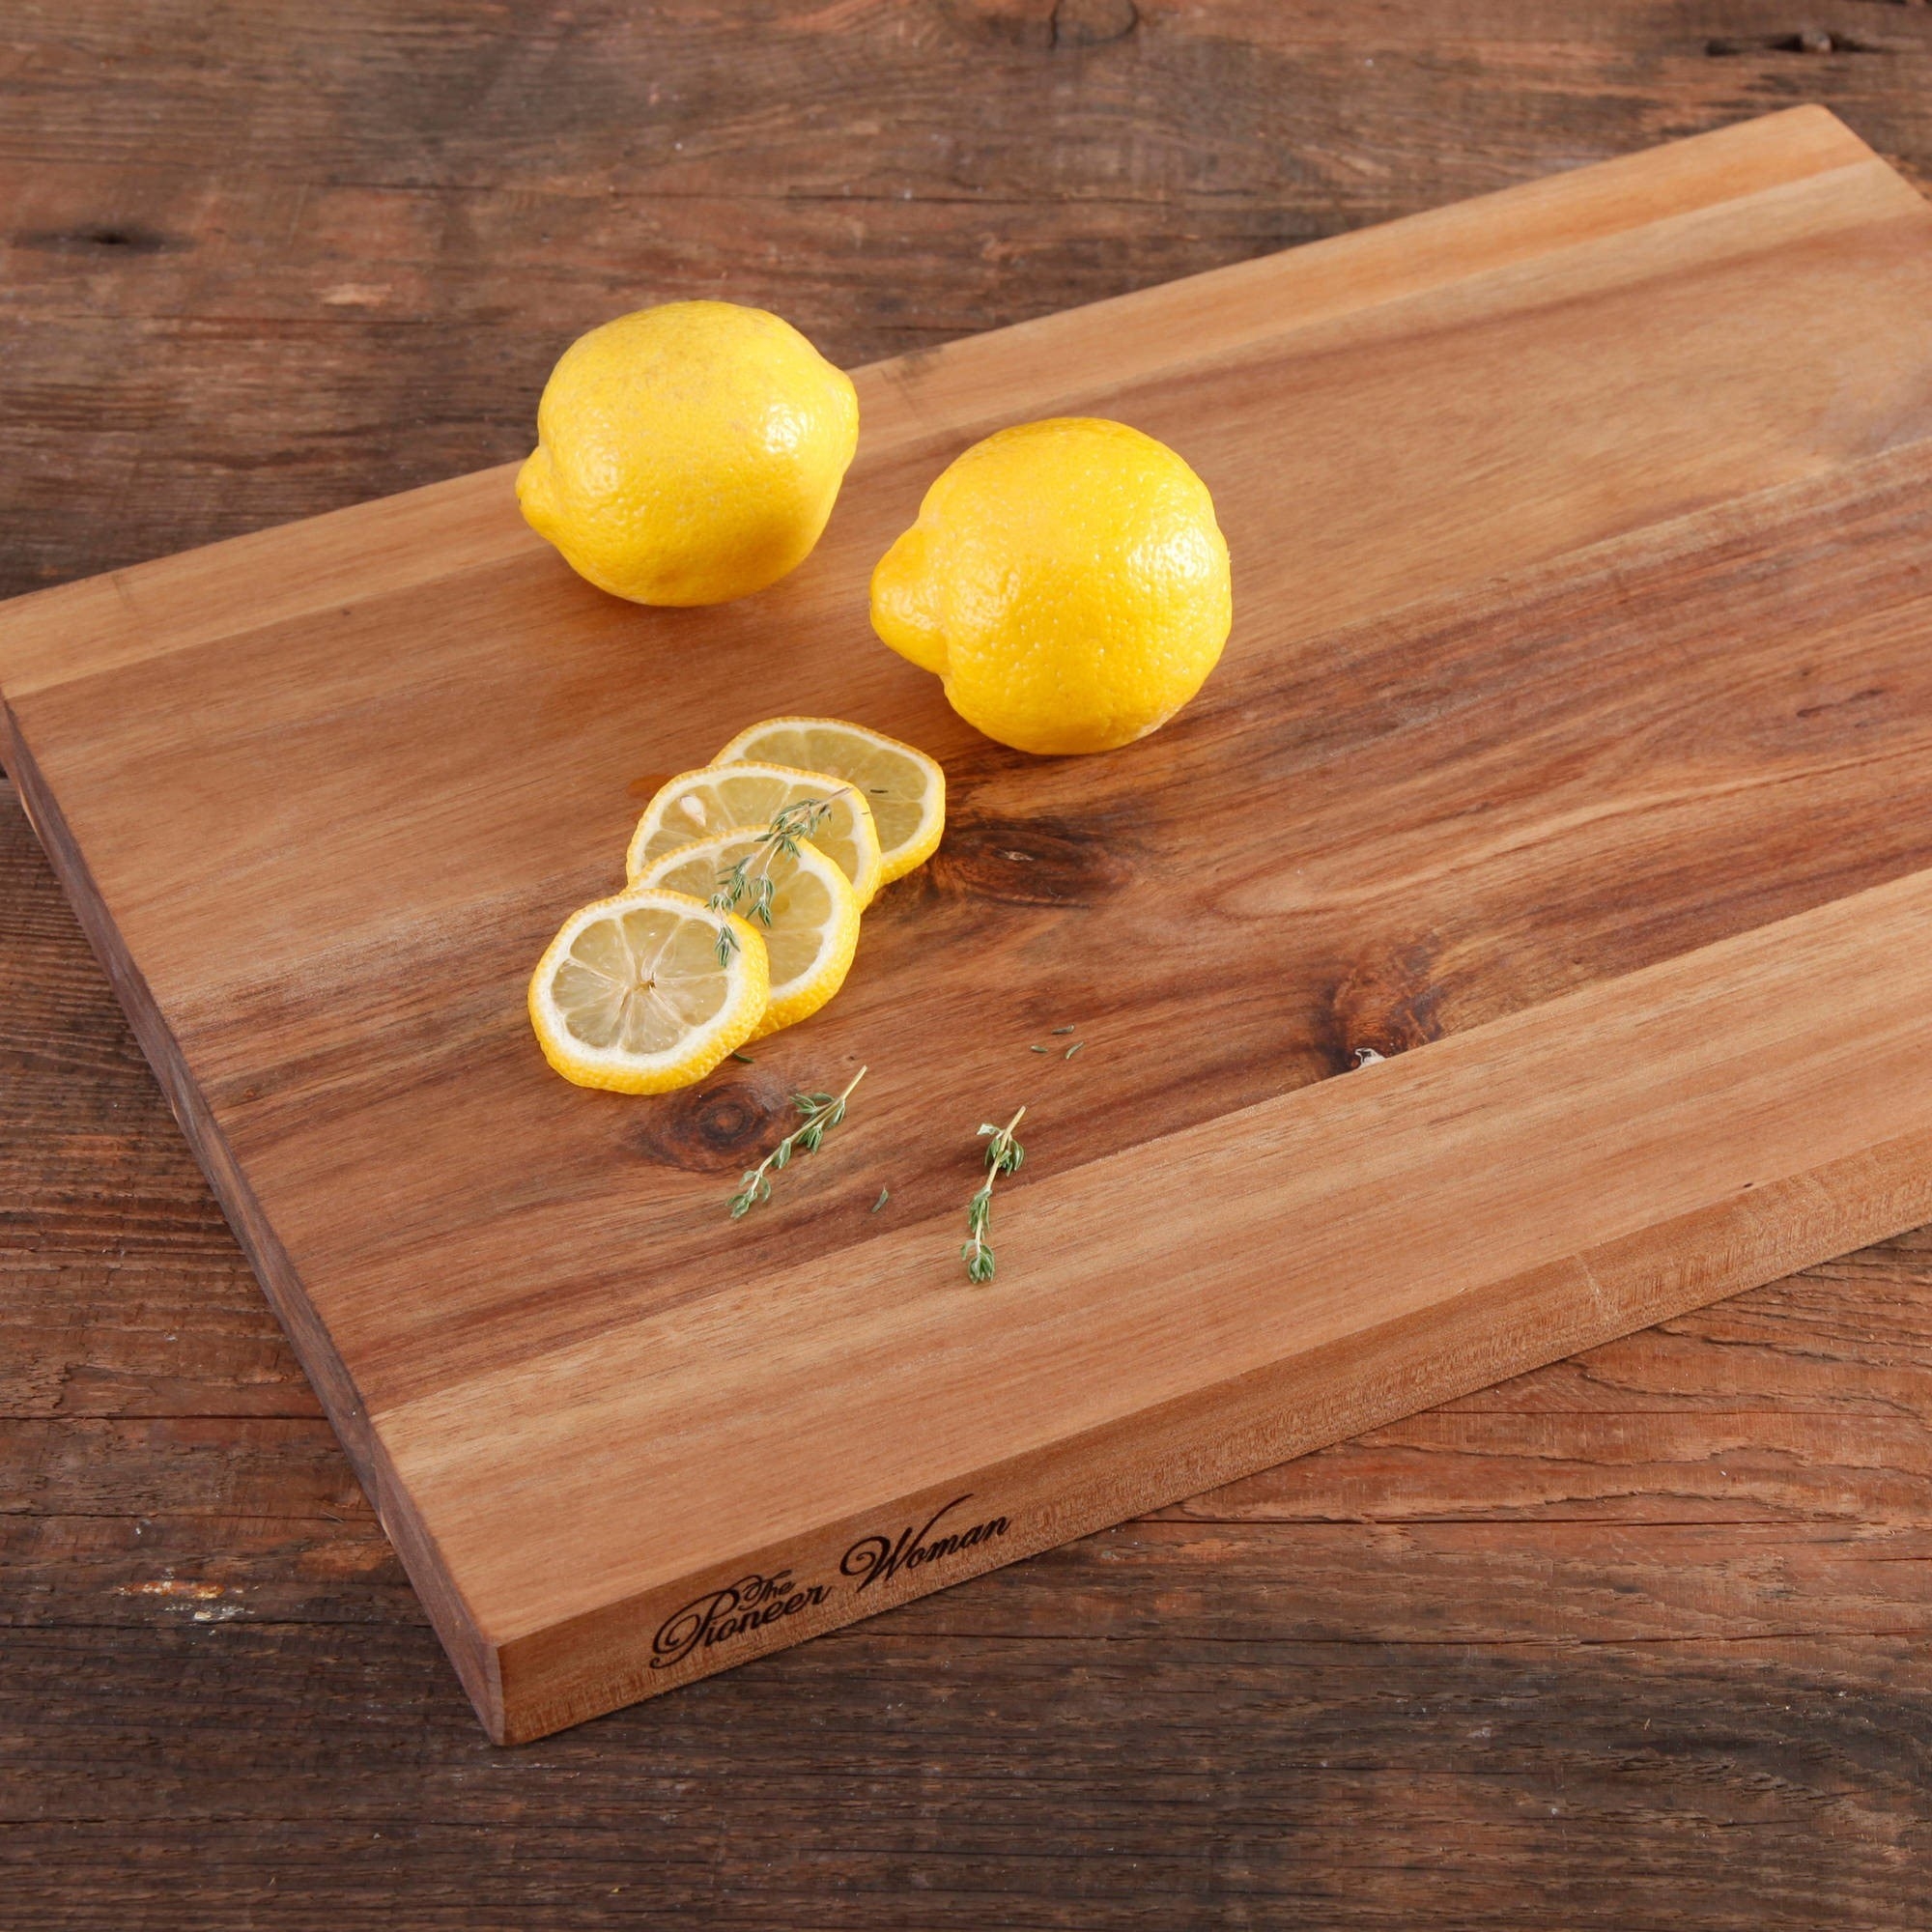 The wooden cutting board